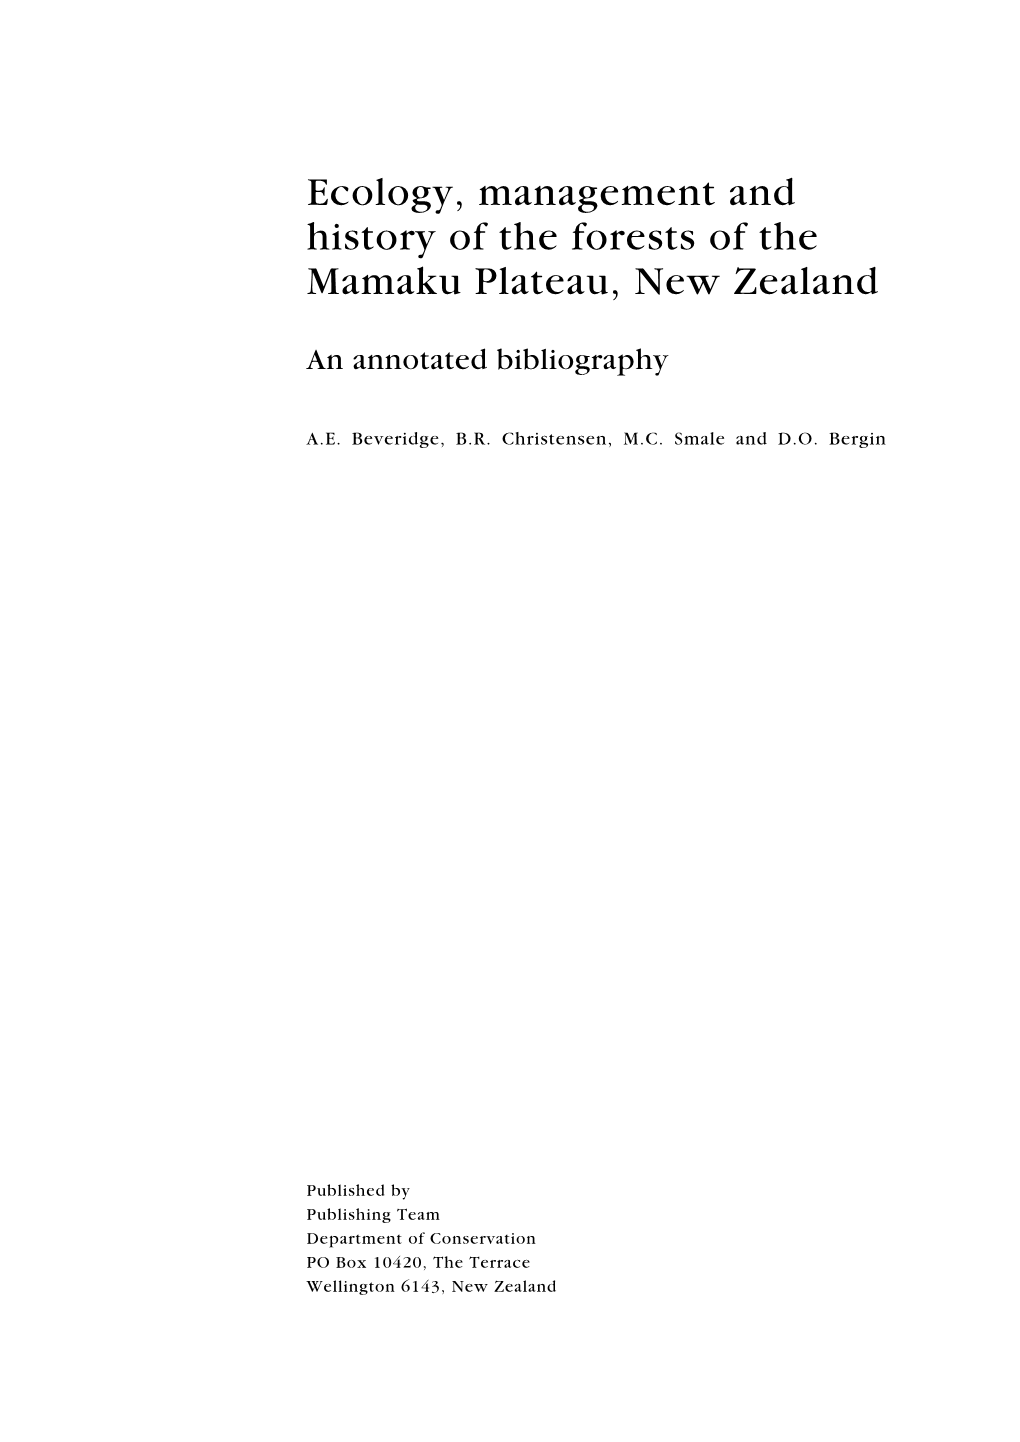 Ecology, Management and History of the Forests of the Mamaku Plateau, New Zealand